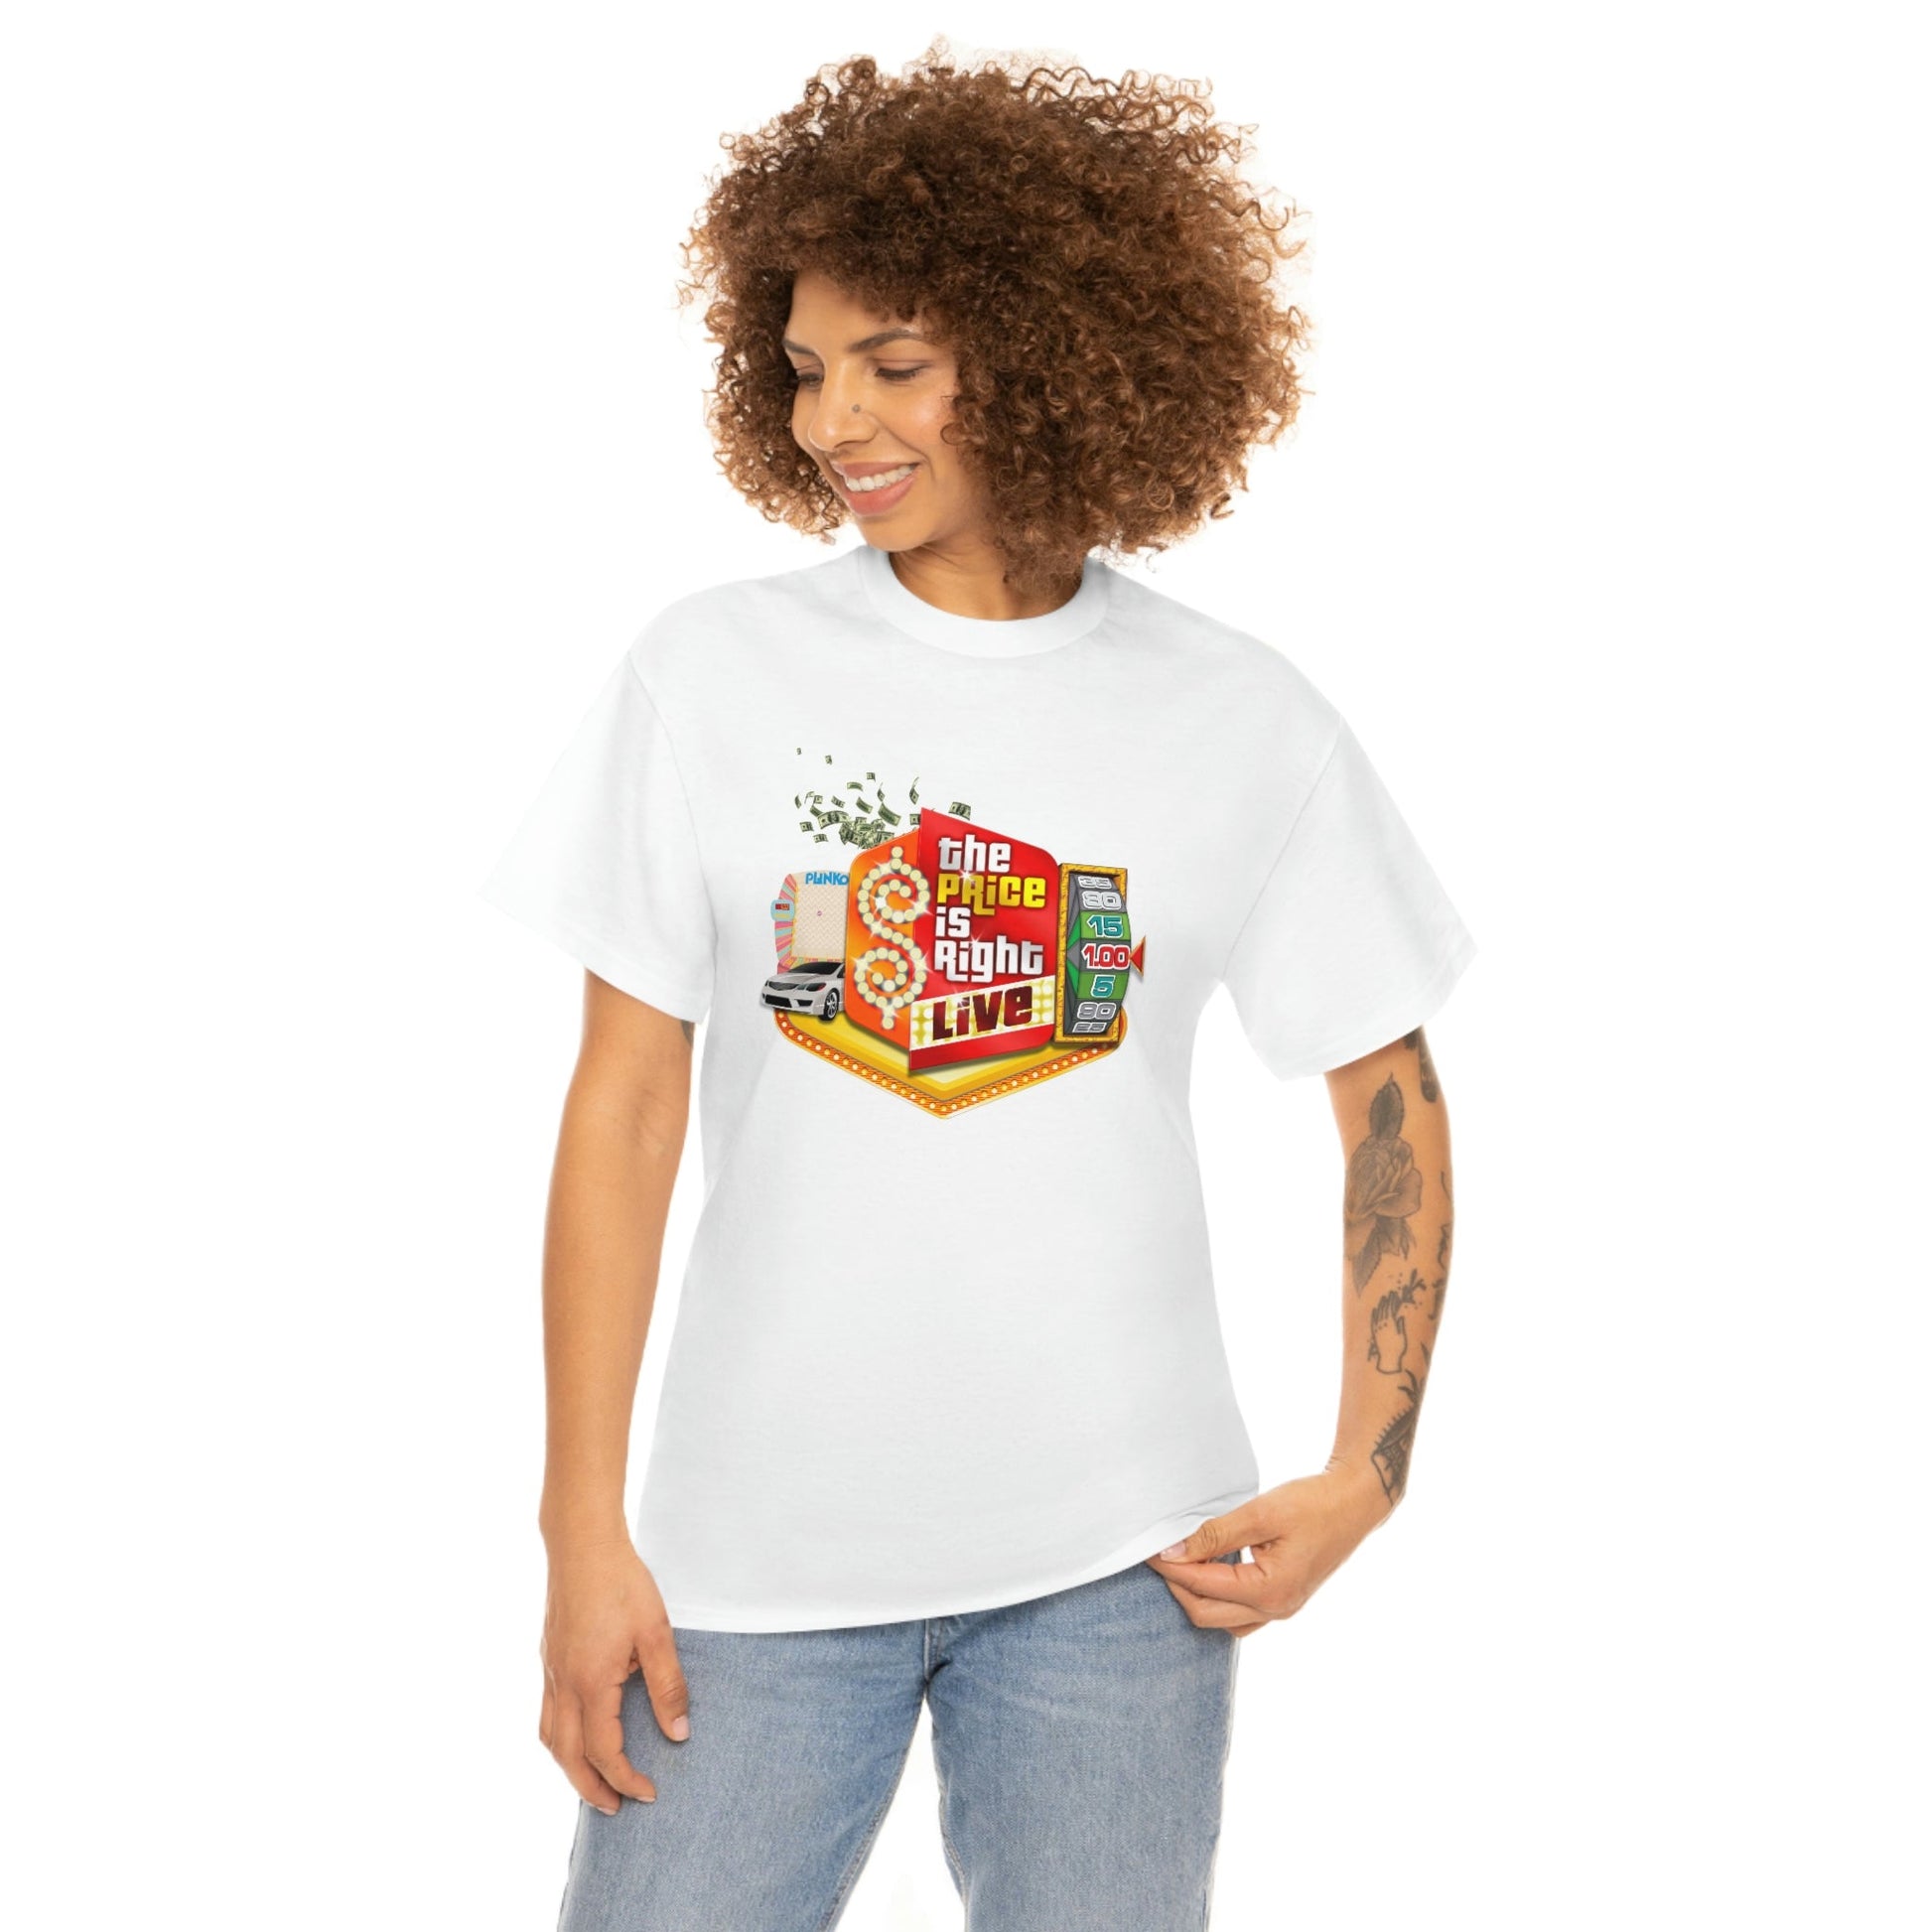 The Price is Right Live TV Show Logo T-Shirt - RetroTeeShop